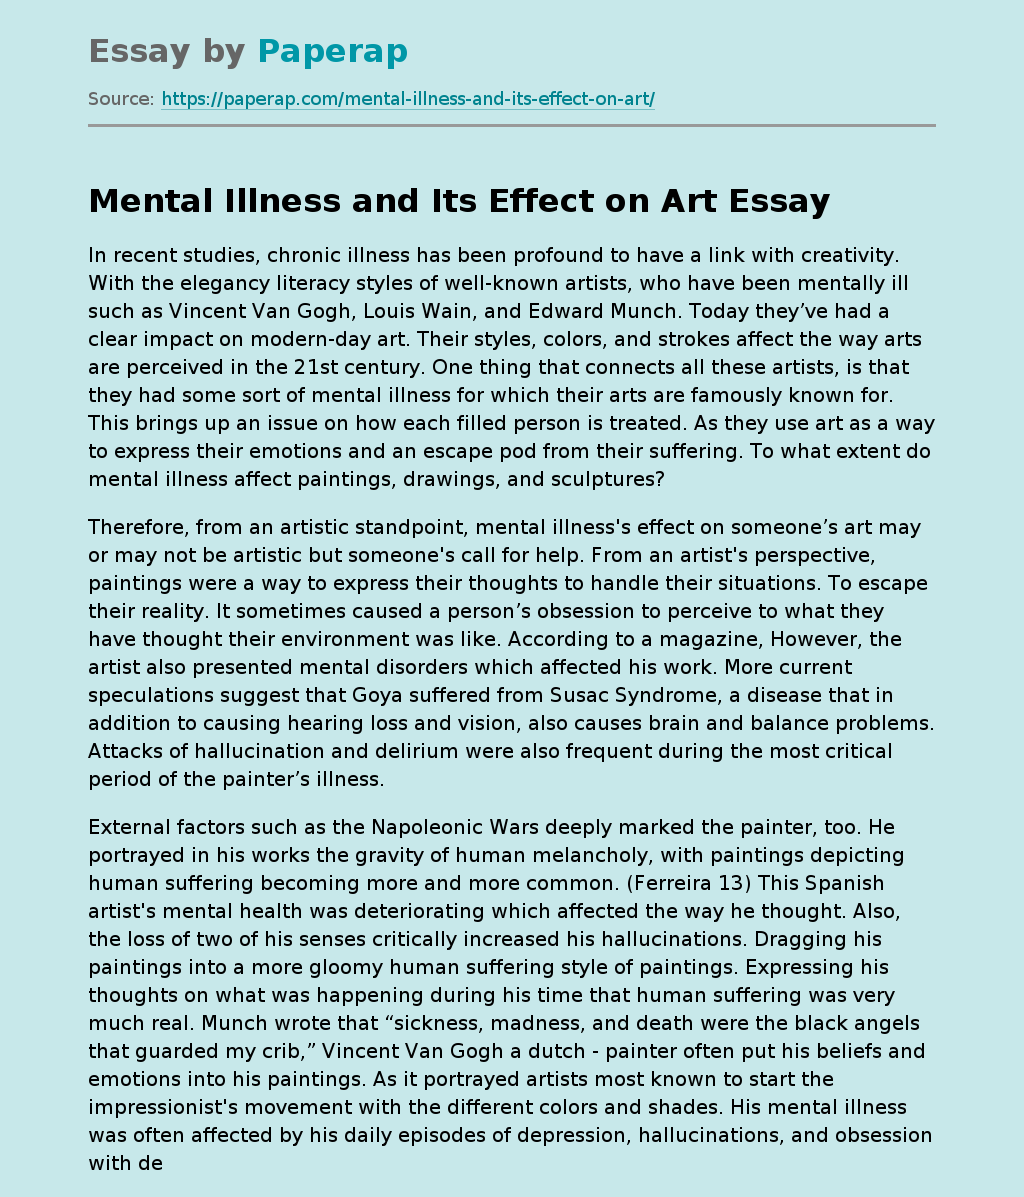 Mental Illness and Its Effect on Art